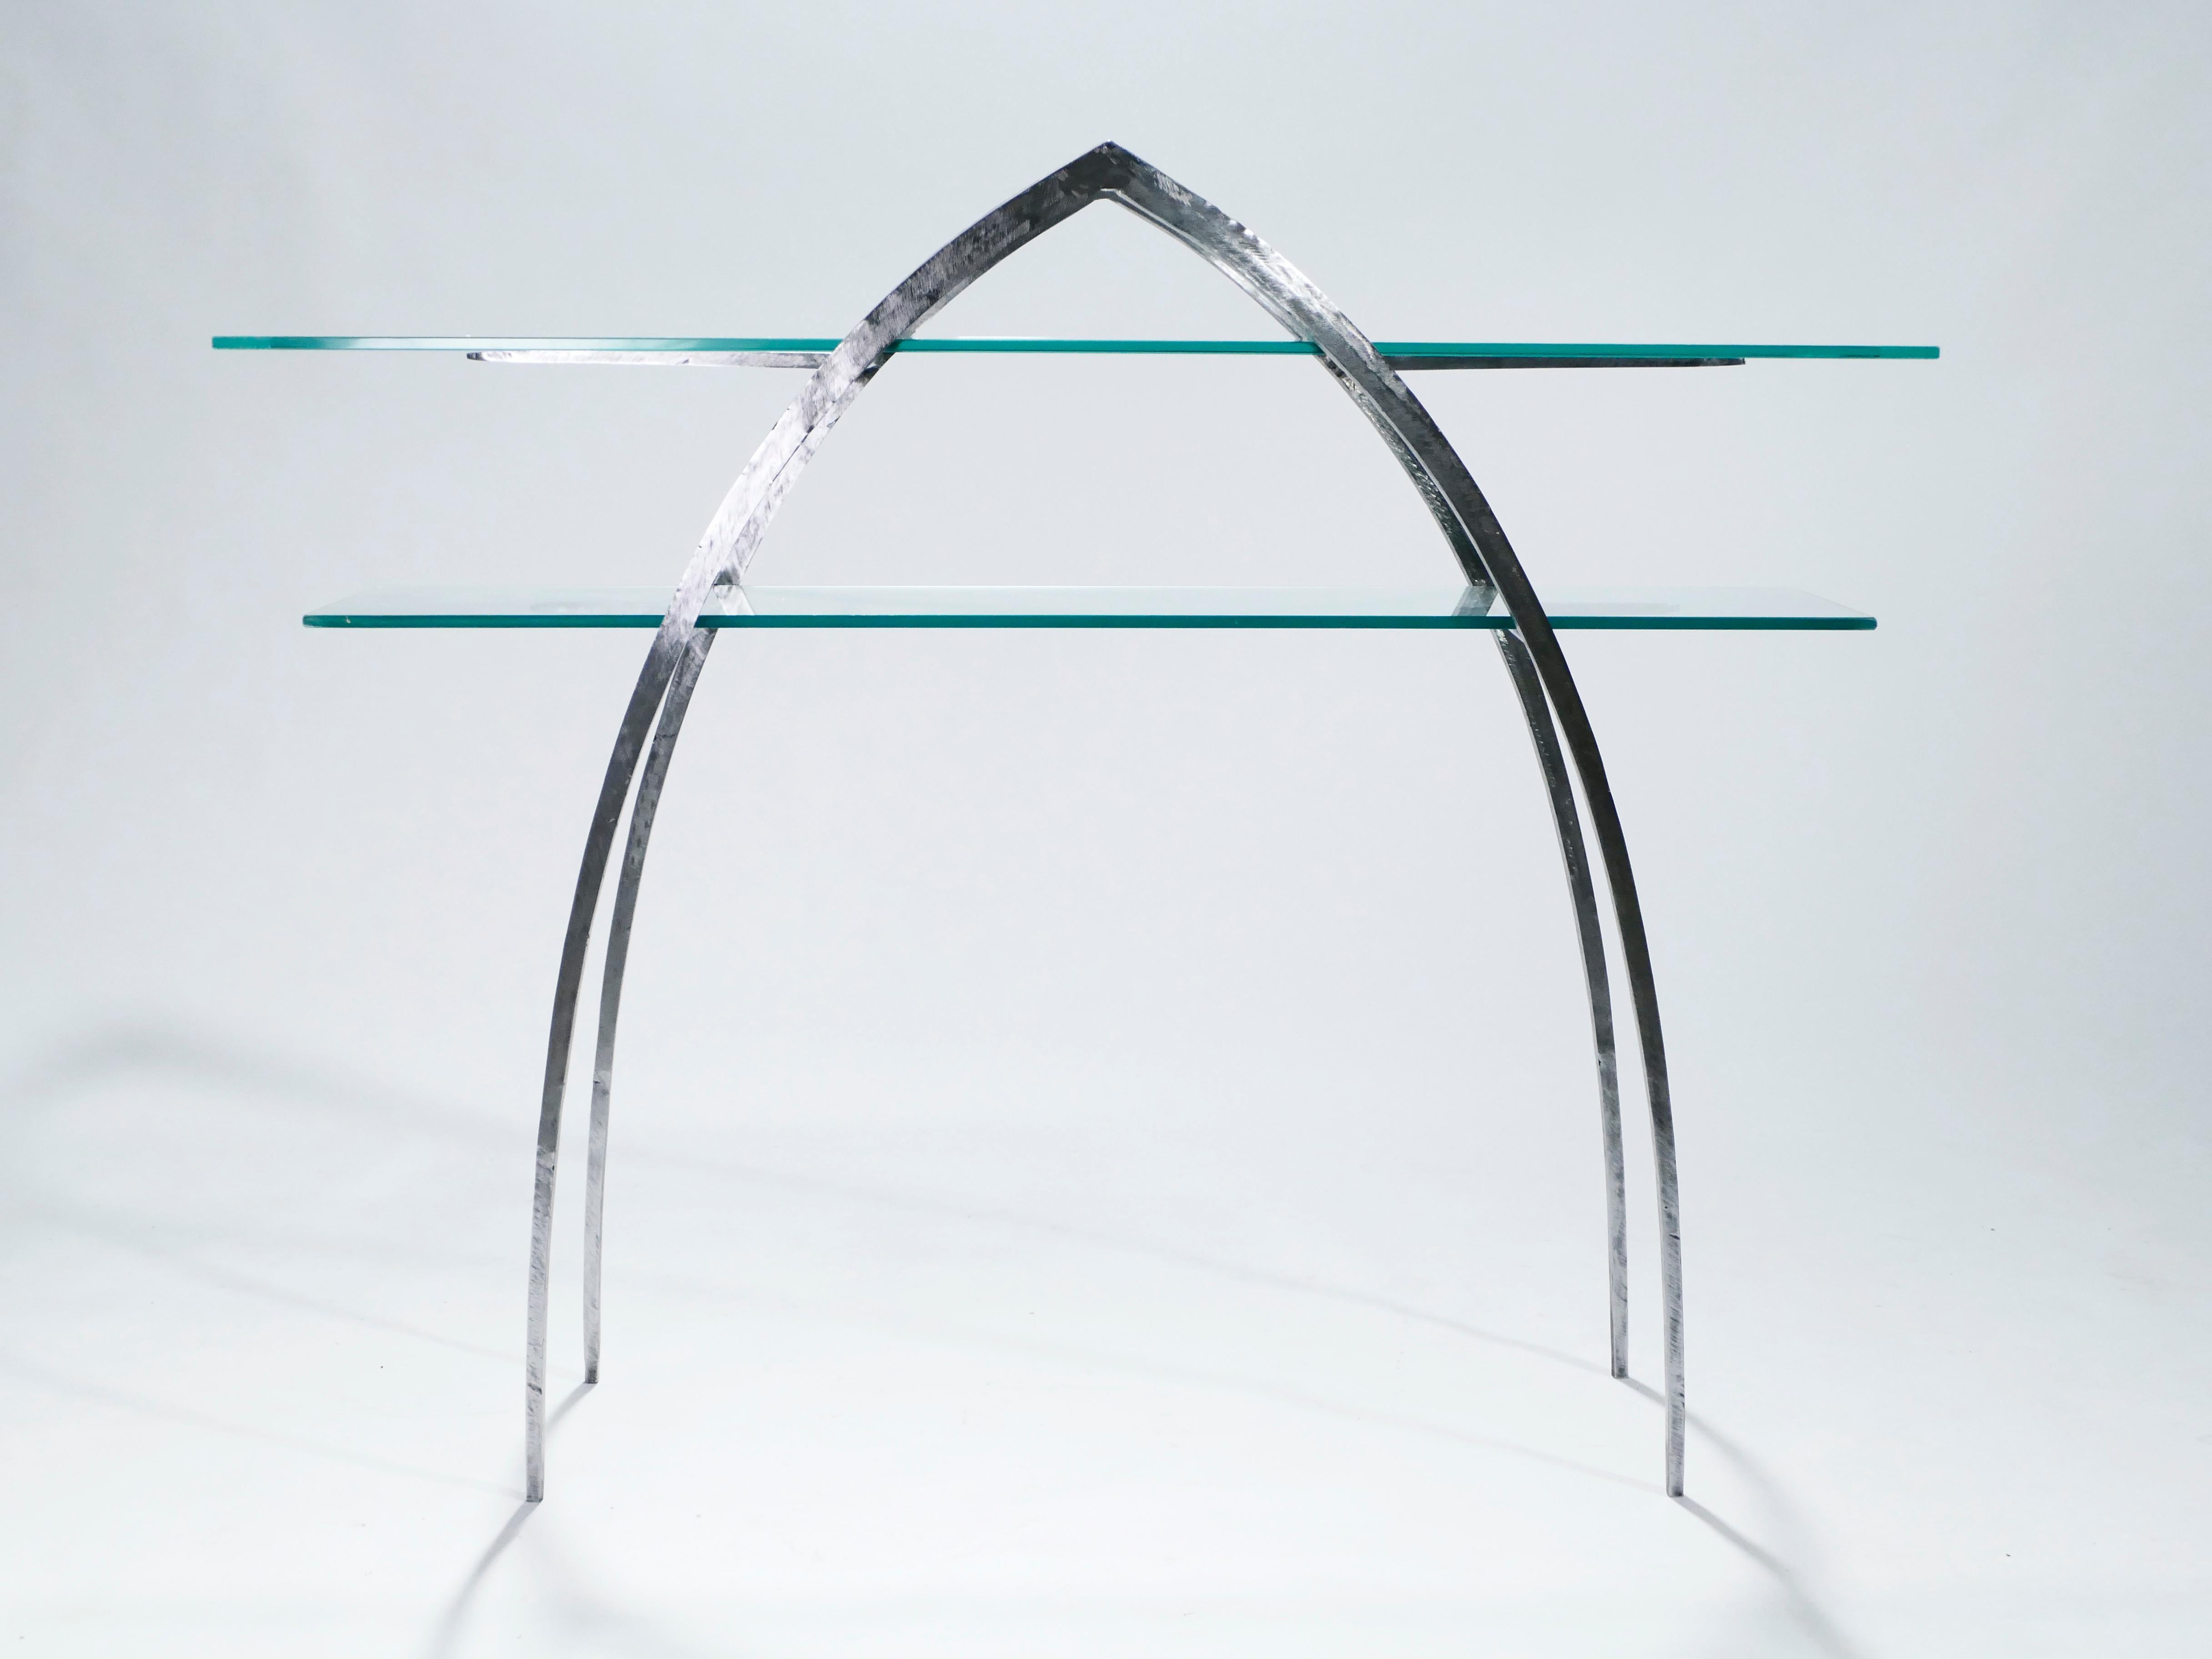 Beautiful French brutalism wrought iron and glass console table made in the early 2000s. The iron structure is sharp and imposing from a distance, two pointed arches and spears serving as the only elements. Sheets of transparent glass, forming two